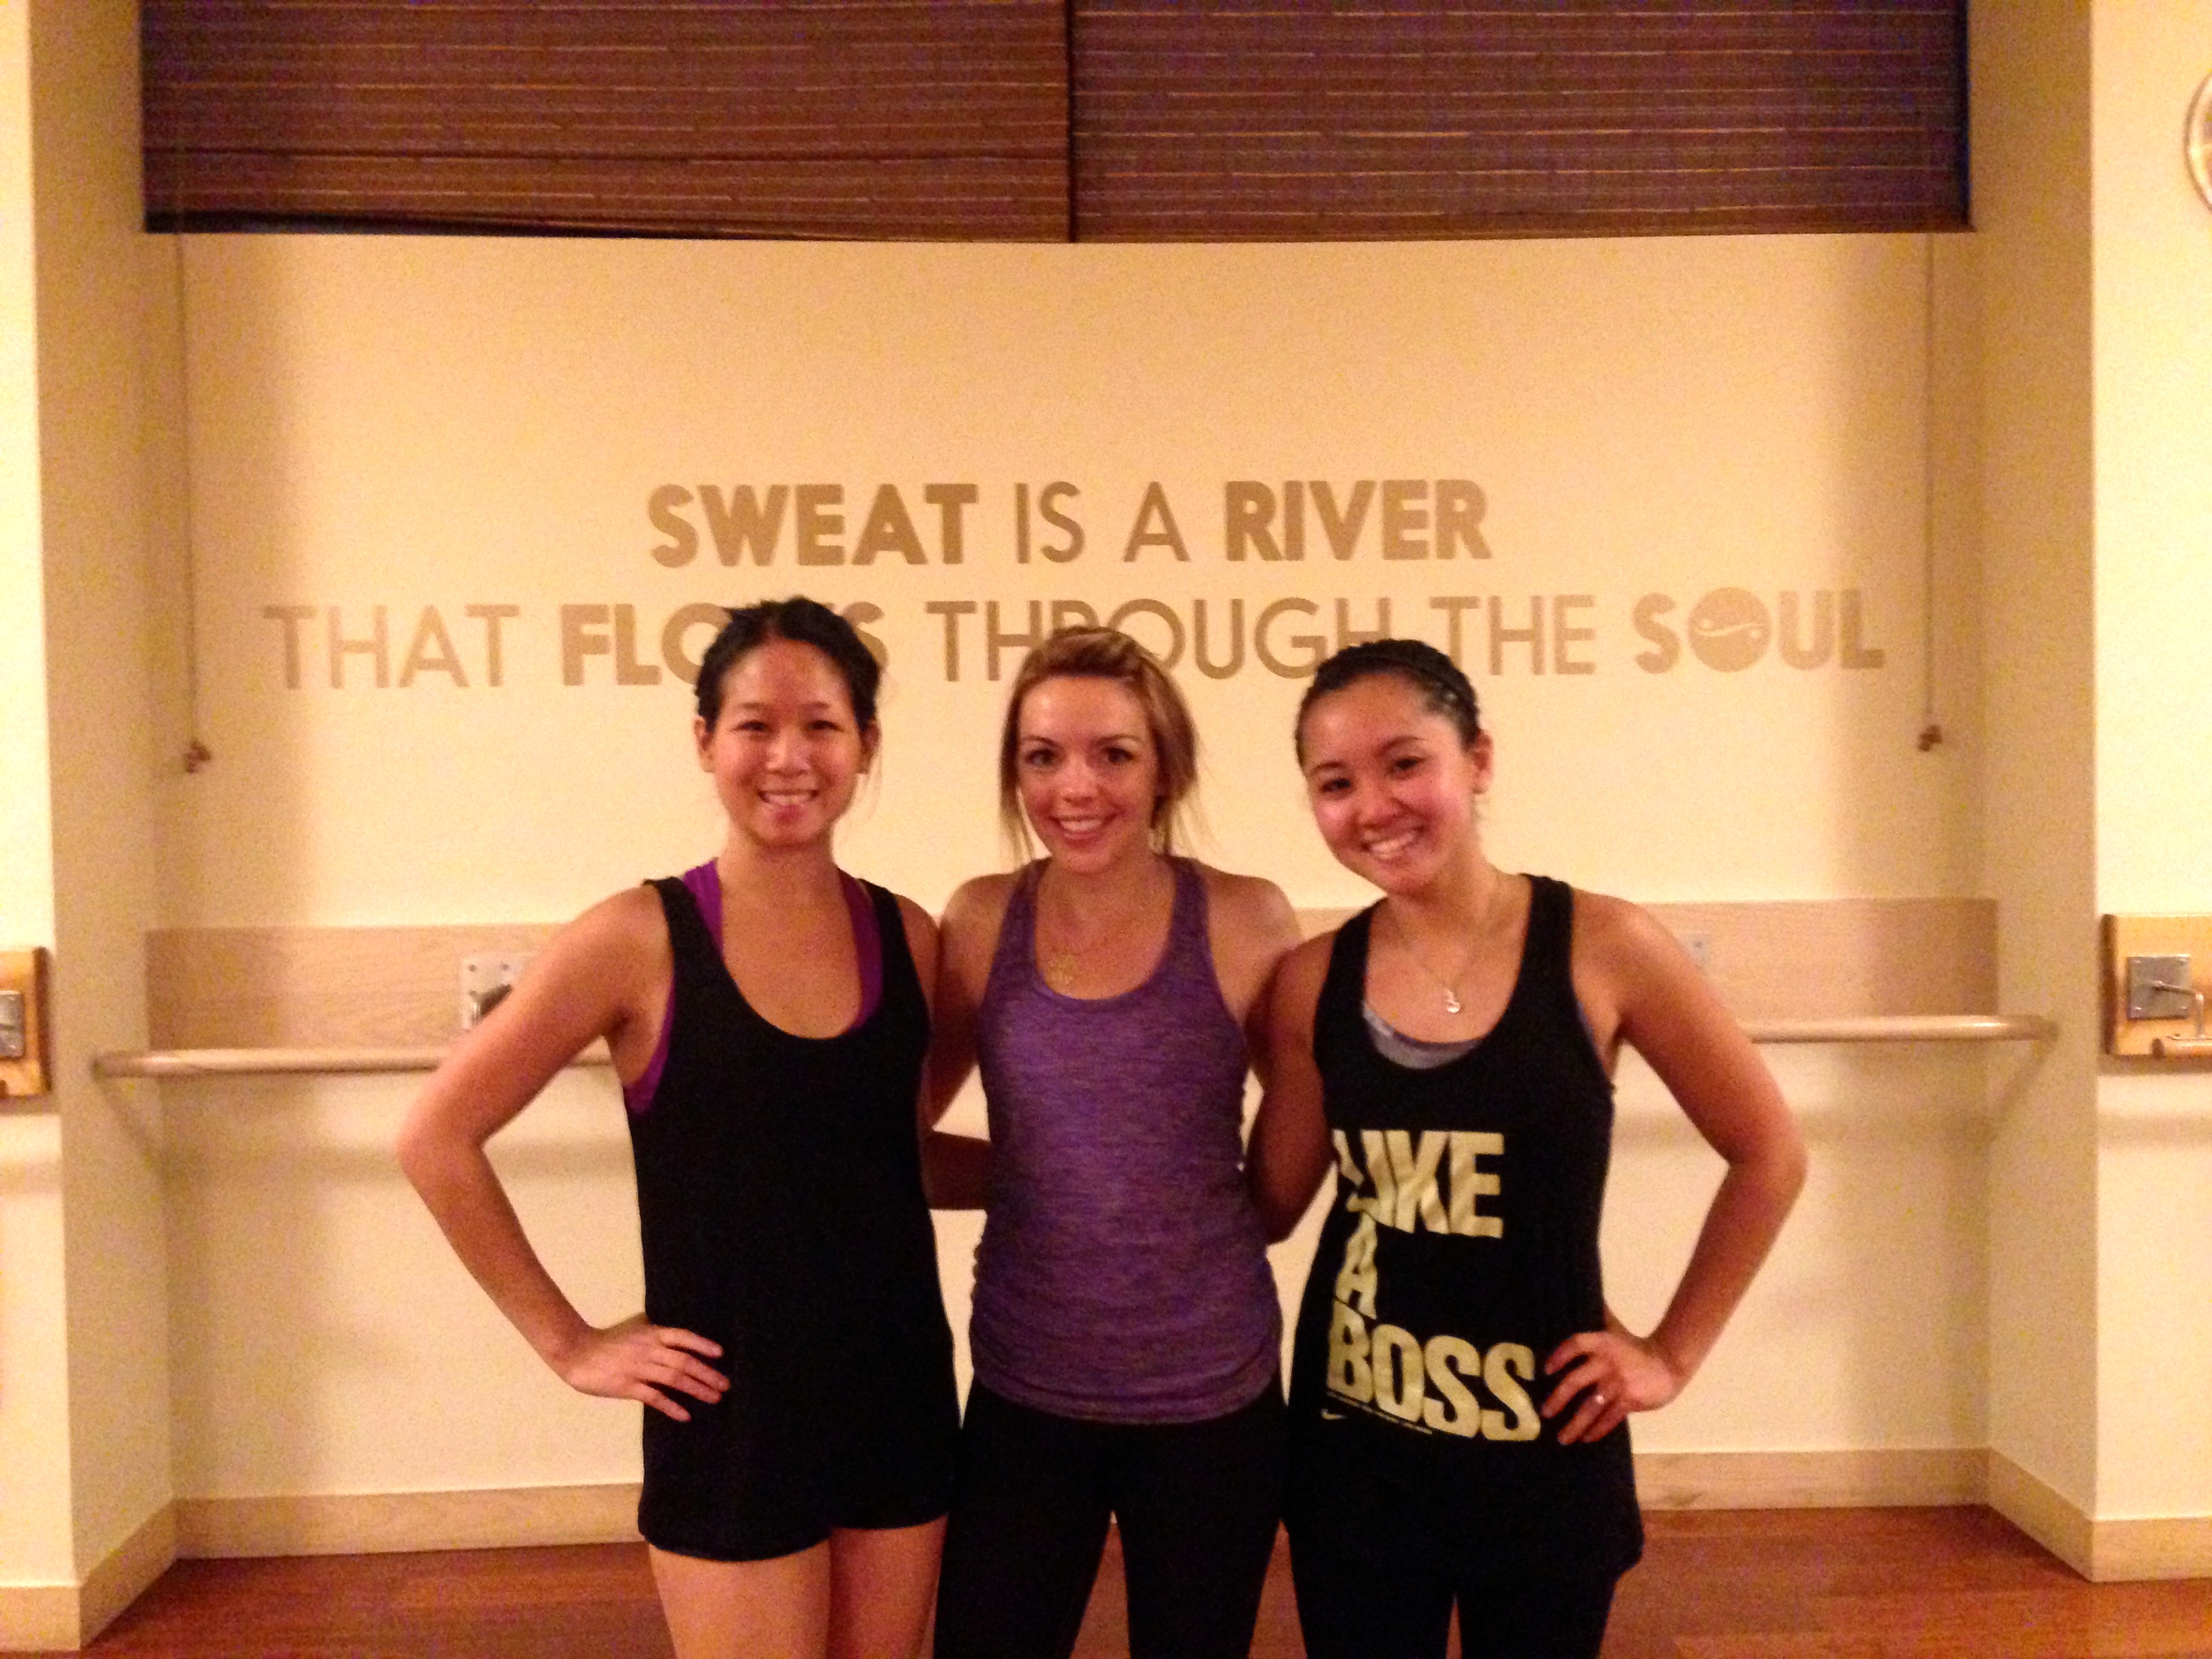 Pictured with gym buddy Jackie and instructor Kristen Hoffman